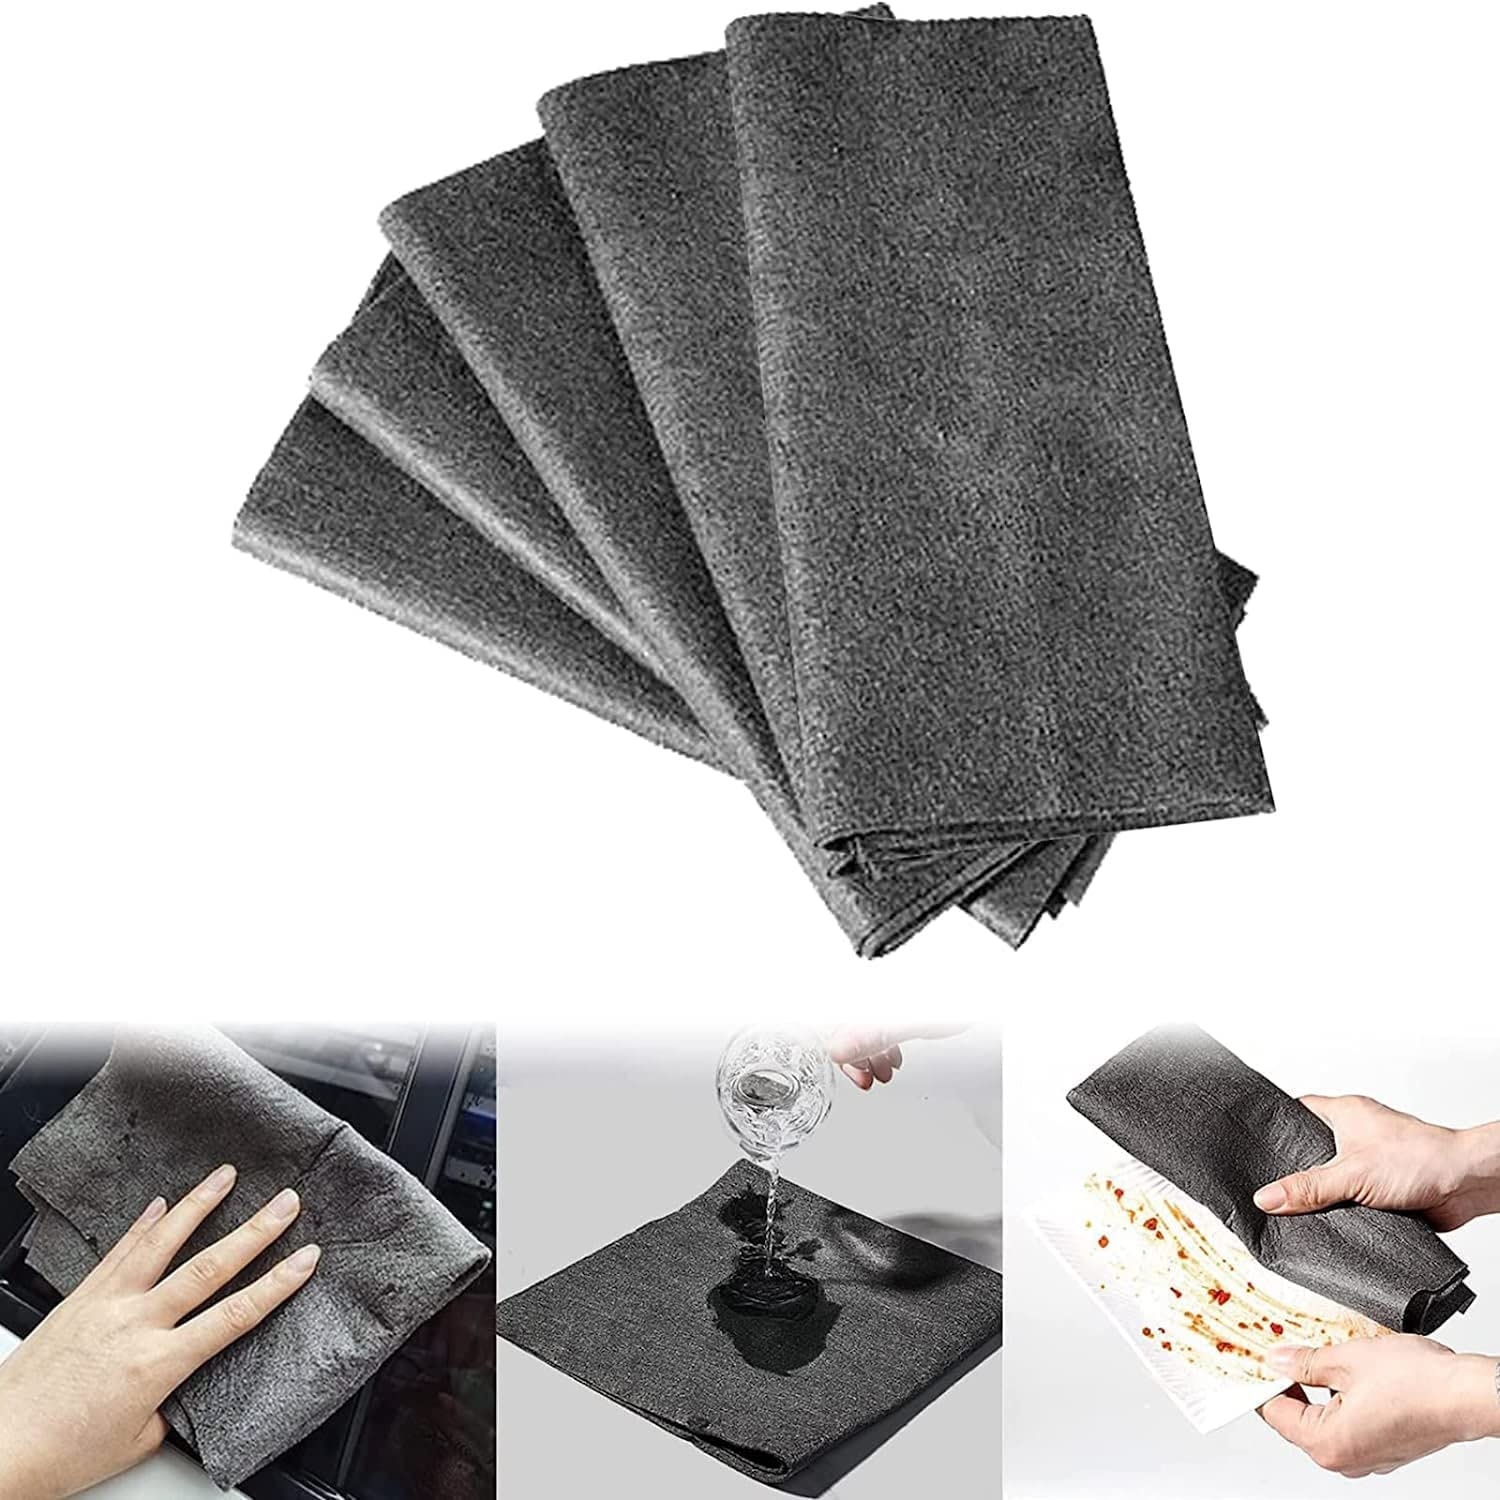 Thickened Magic Cleaning Cloth, All-Purpose Microfiber Cleaning Cloth, Reusable House Cleaning Cloth for Glass Windows, Kitchenware, Cars, 11.8*11.8in (3pcs)